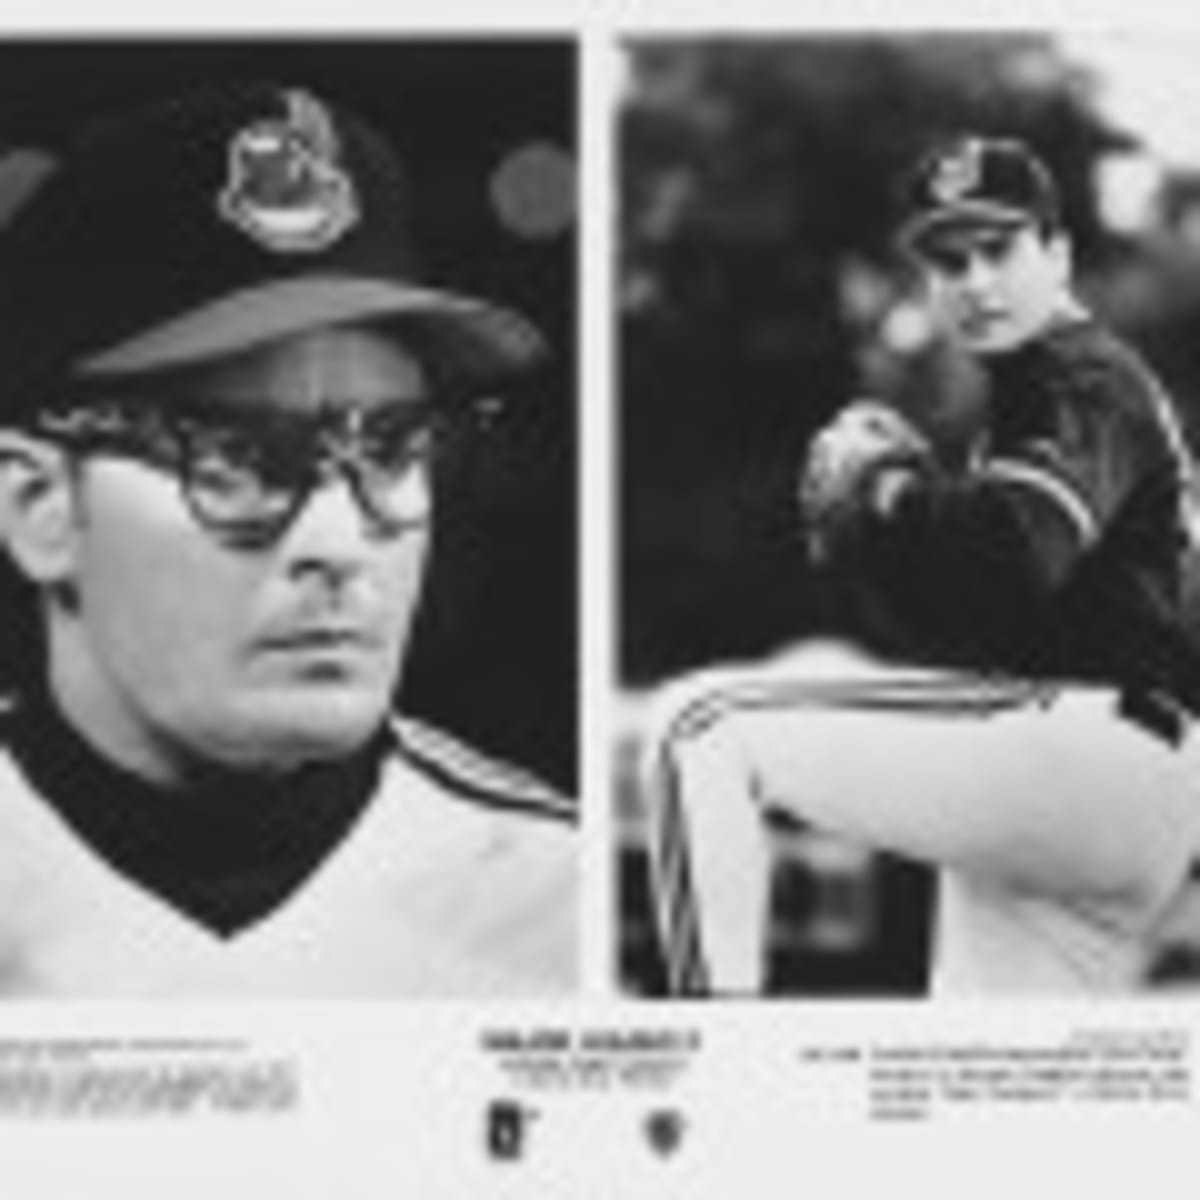 Charlie Sheen donned his Ricky Vaughn Indians uniform for the World Series